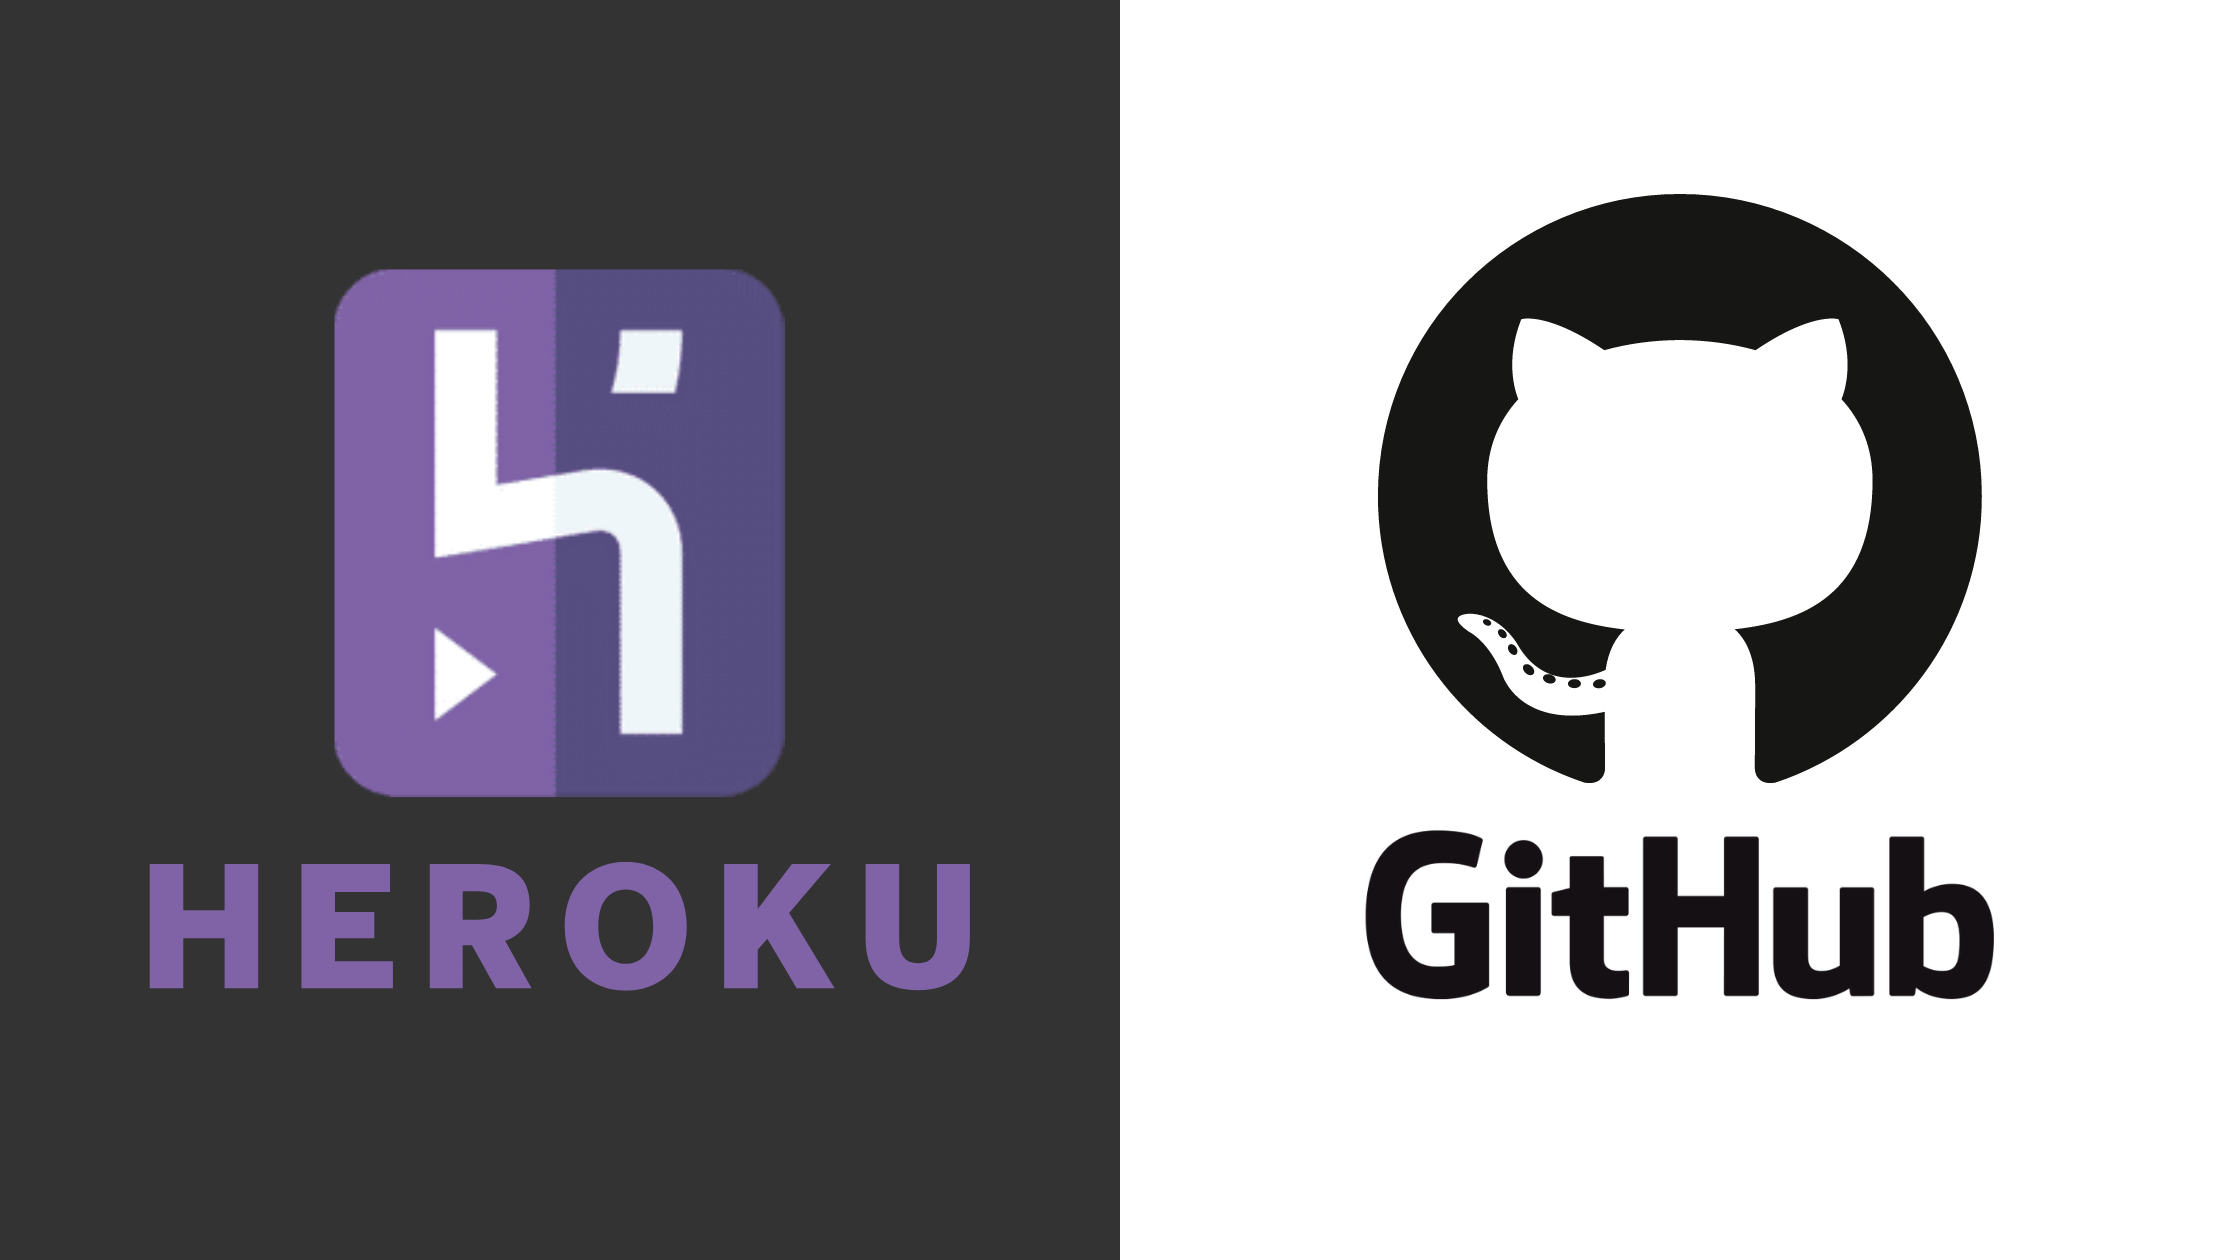 Getting Started with Heroku